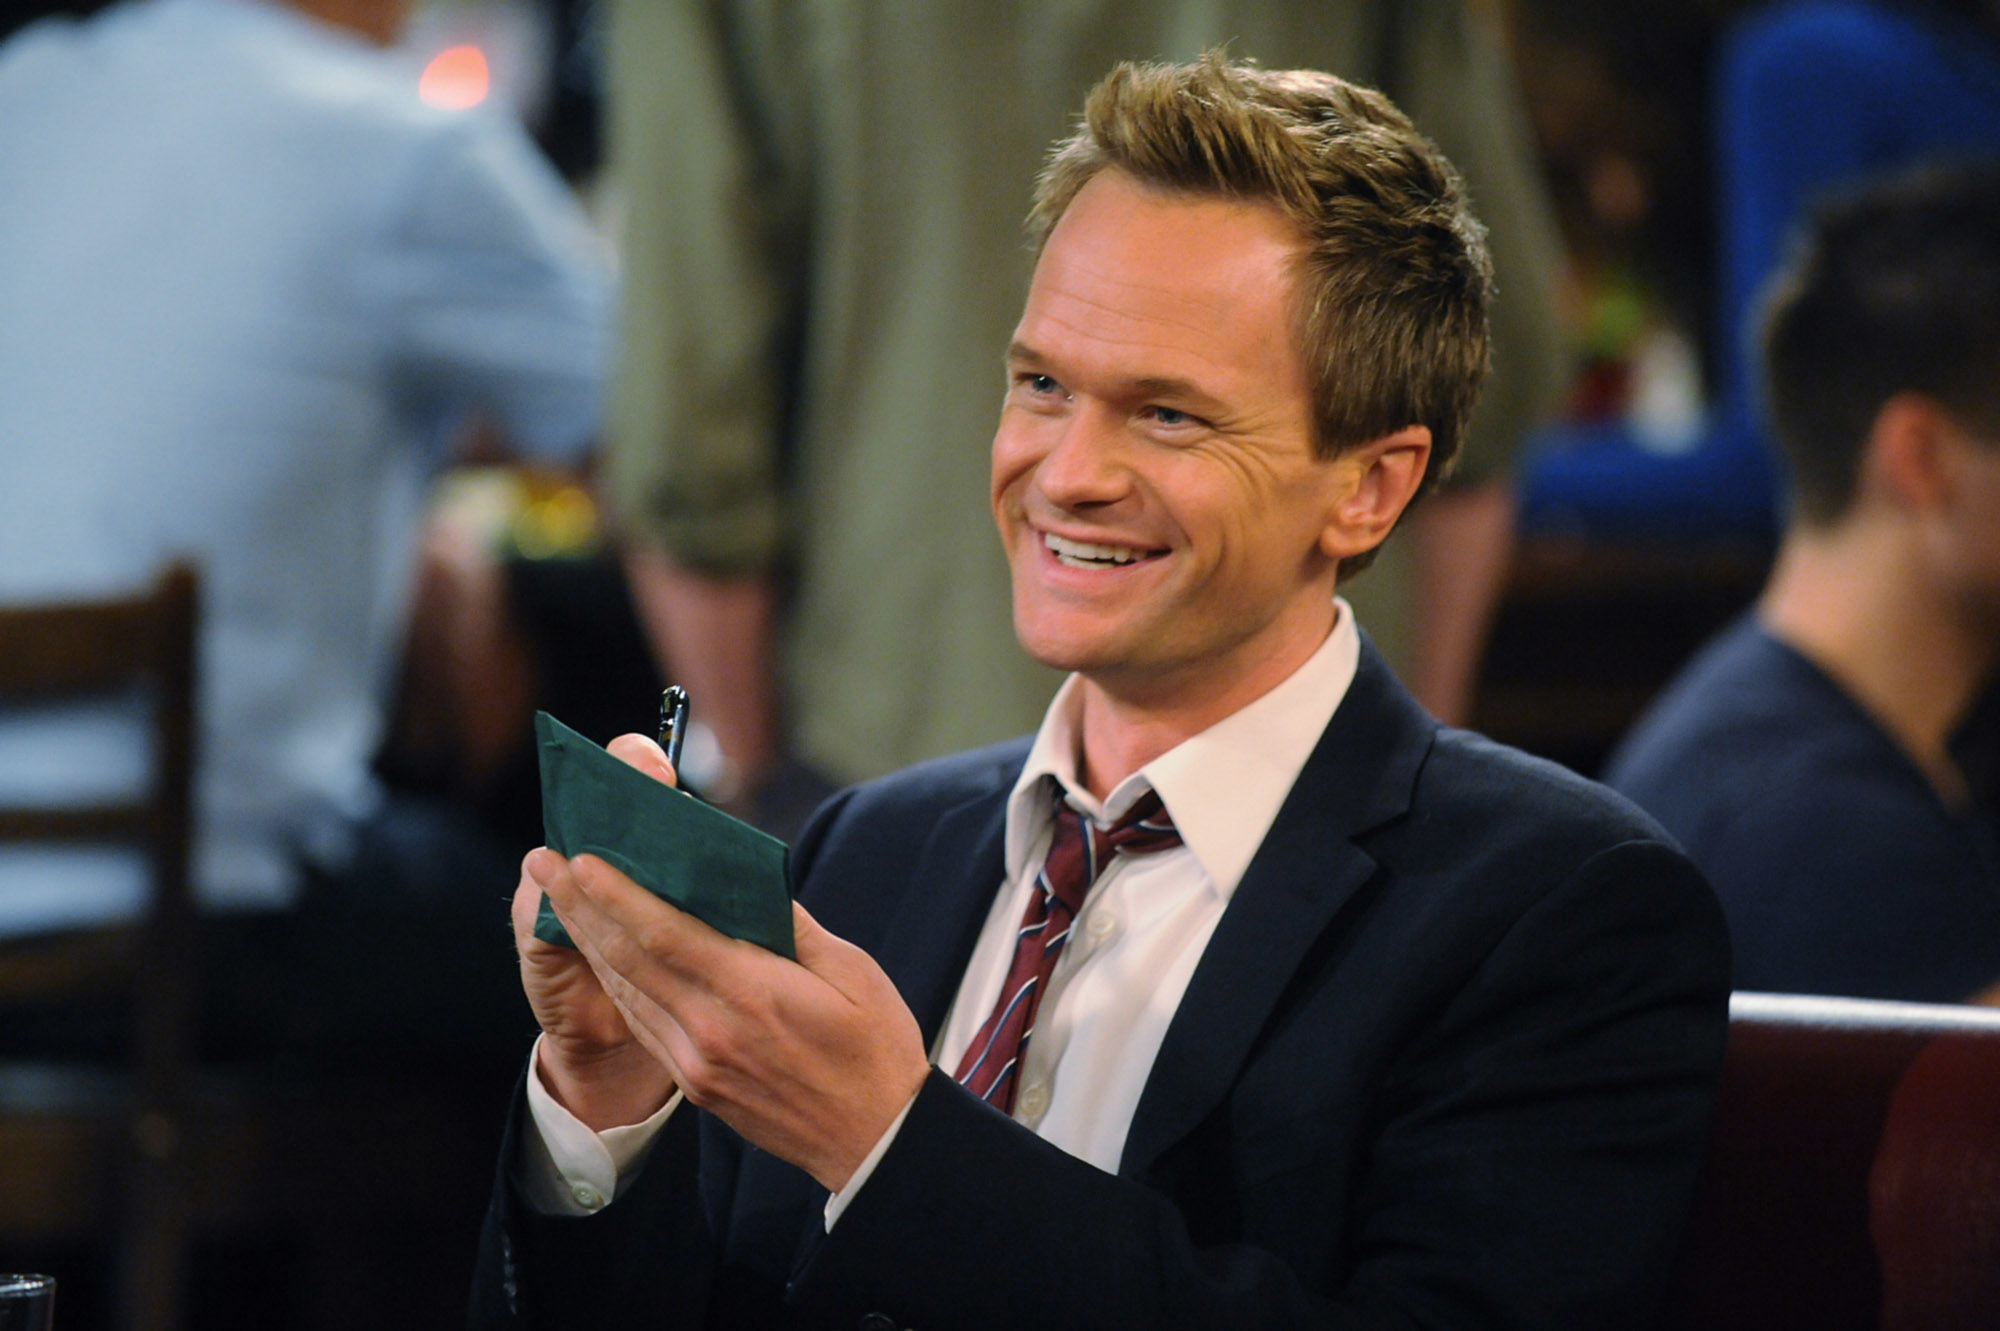 Barney Stinson from &quot;How I Met Your Mother&quot; smiles, holding the Playbook in a bar scene